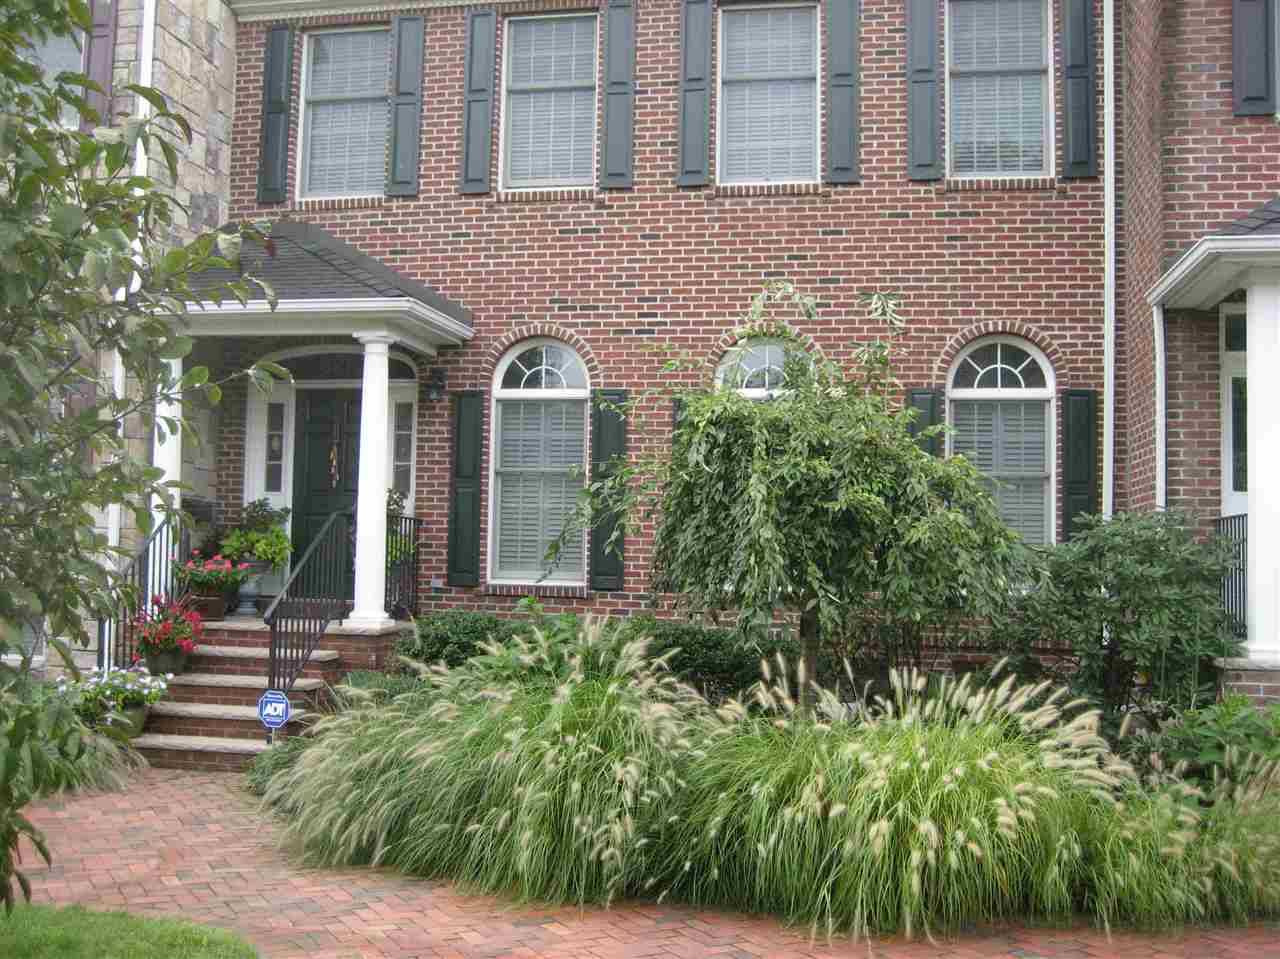 ARCHITECTURAL DELIGHT W/3 LEVELS OF LUX LIVING - 3 BR Condo New Jersey